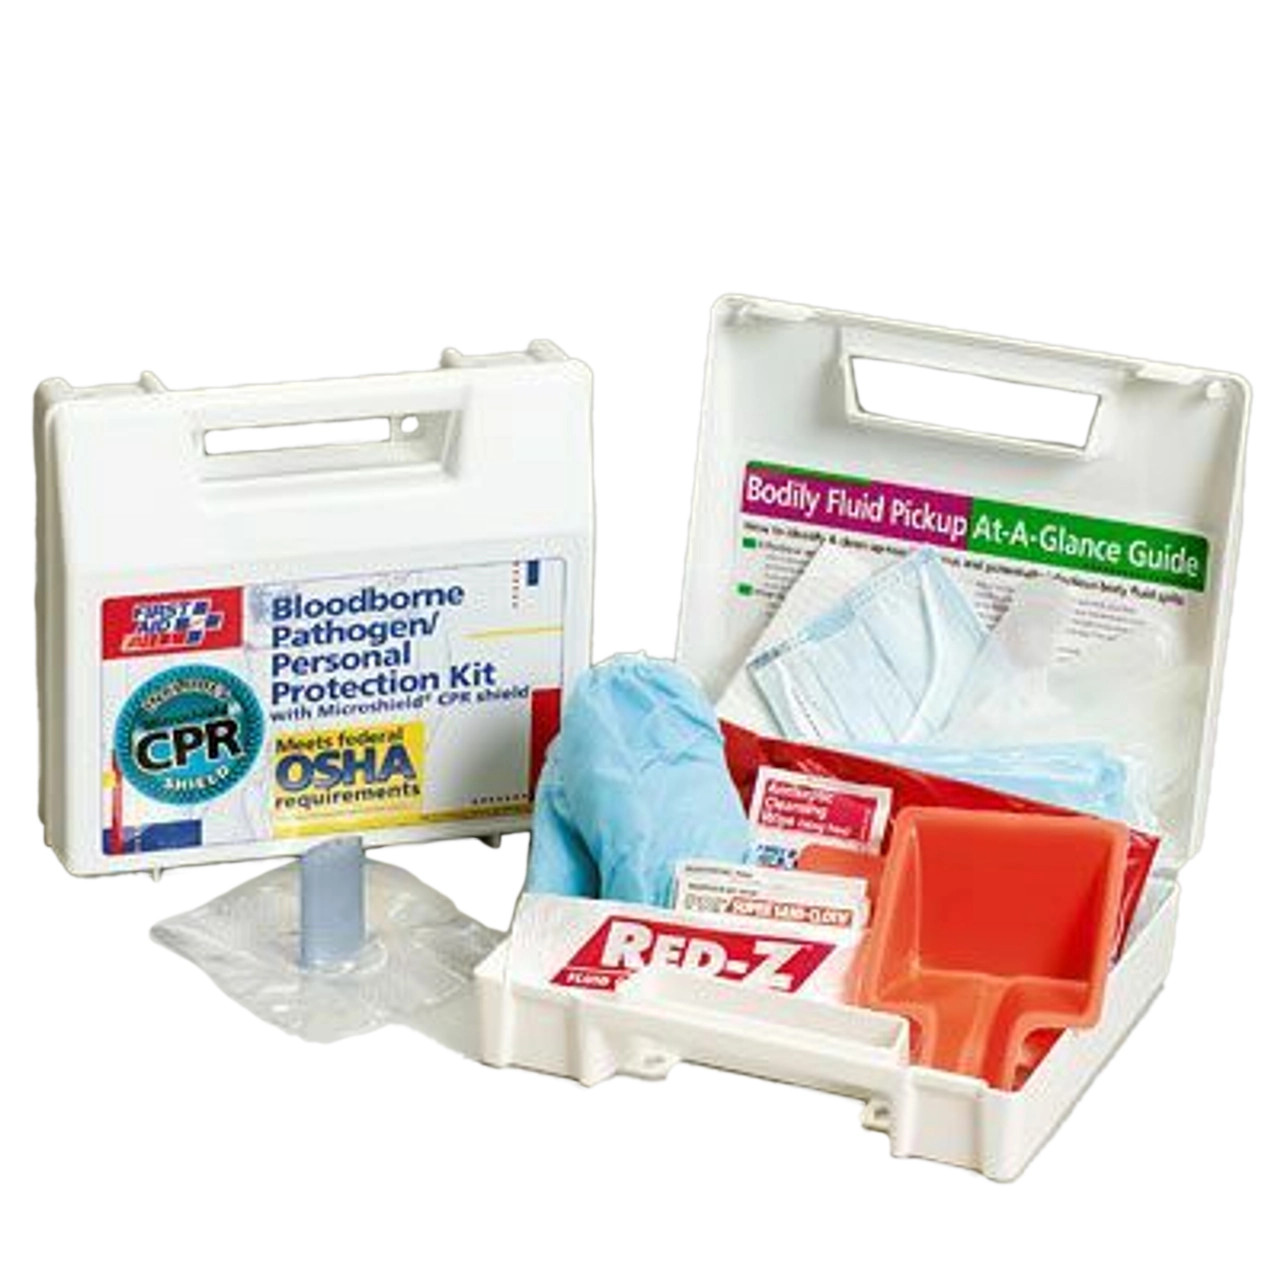 Bloodborne Pathogen Personal Protection Kit with Microshield